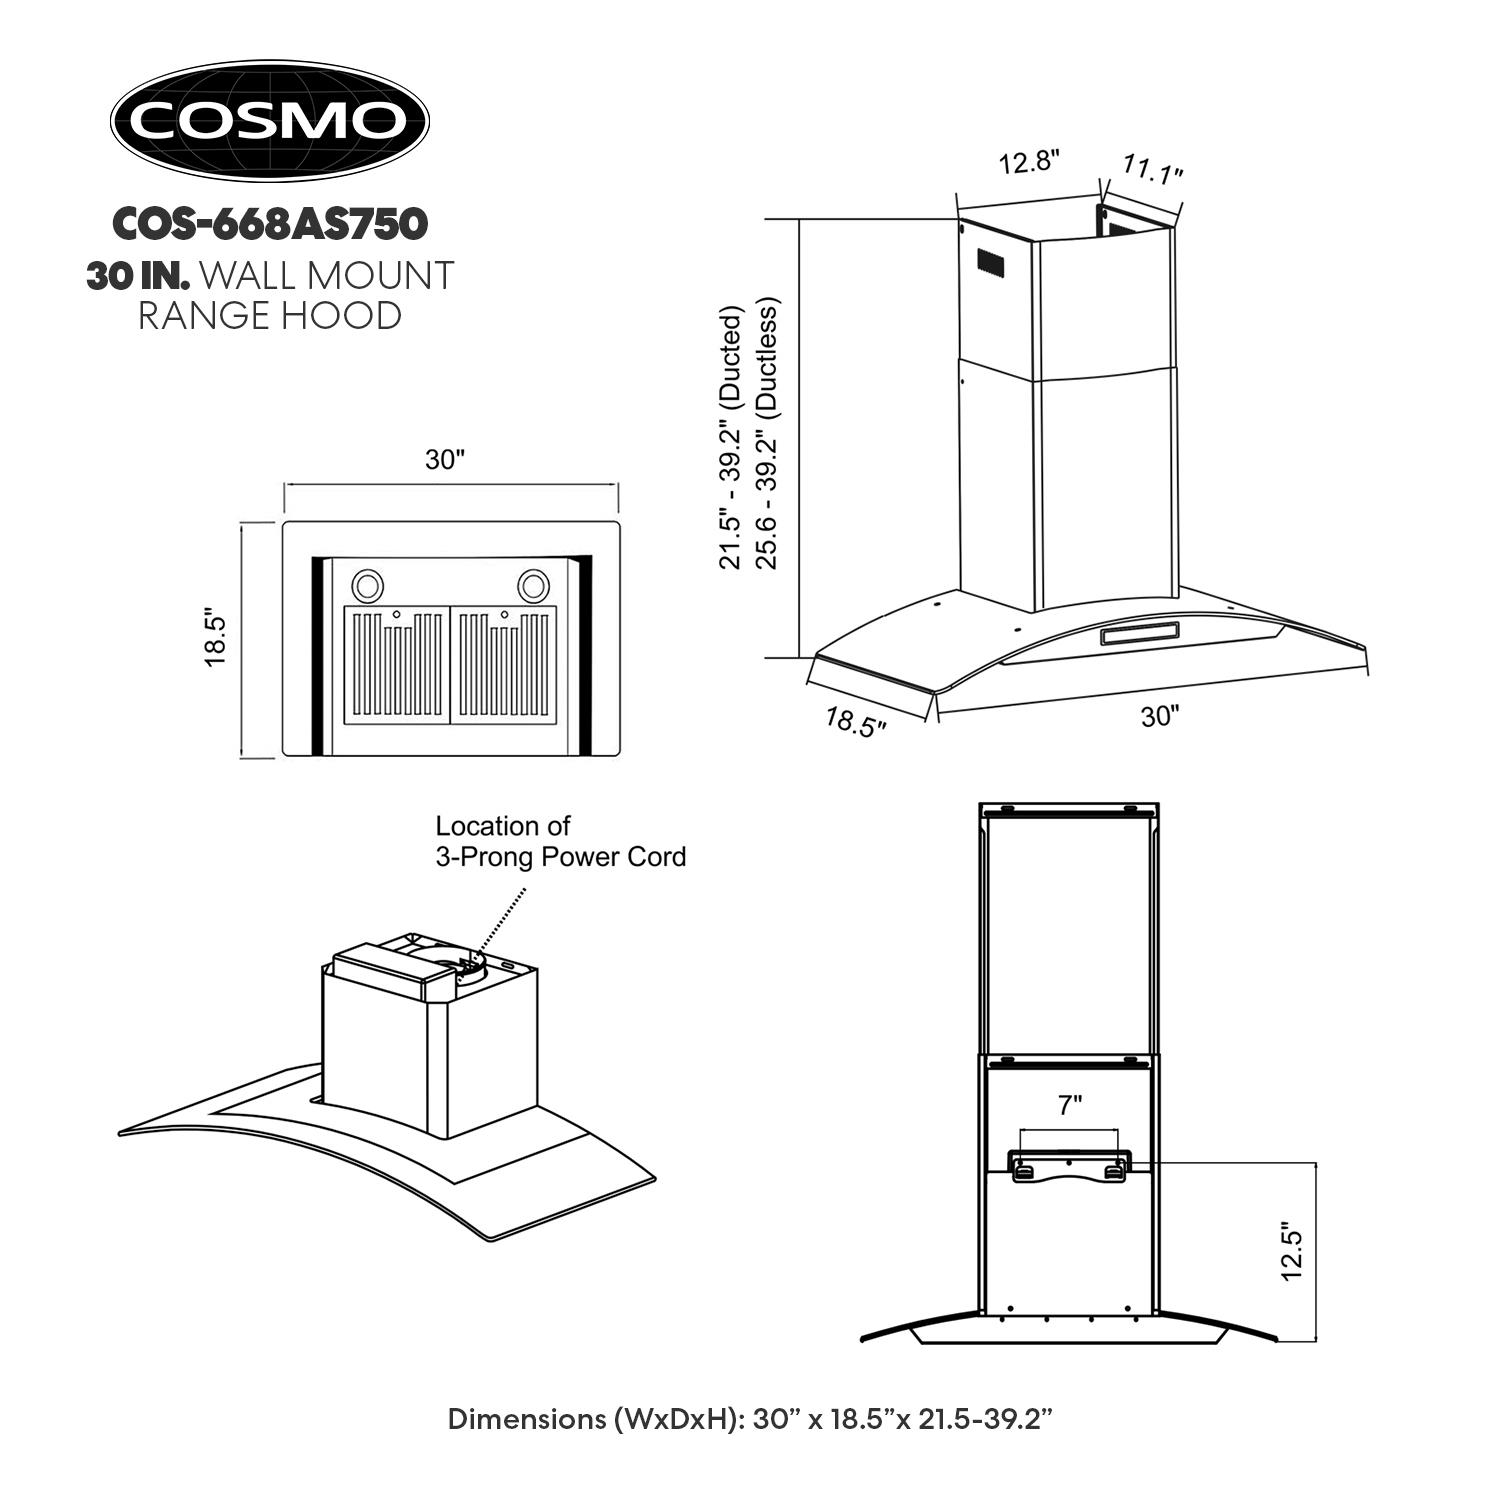  COSMO COS-668AS750 30 in. Wall Mount Range Hood with